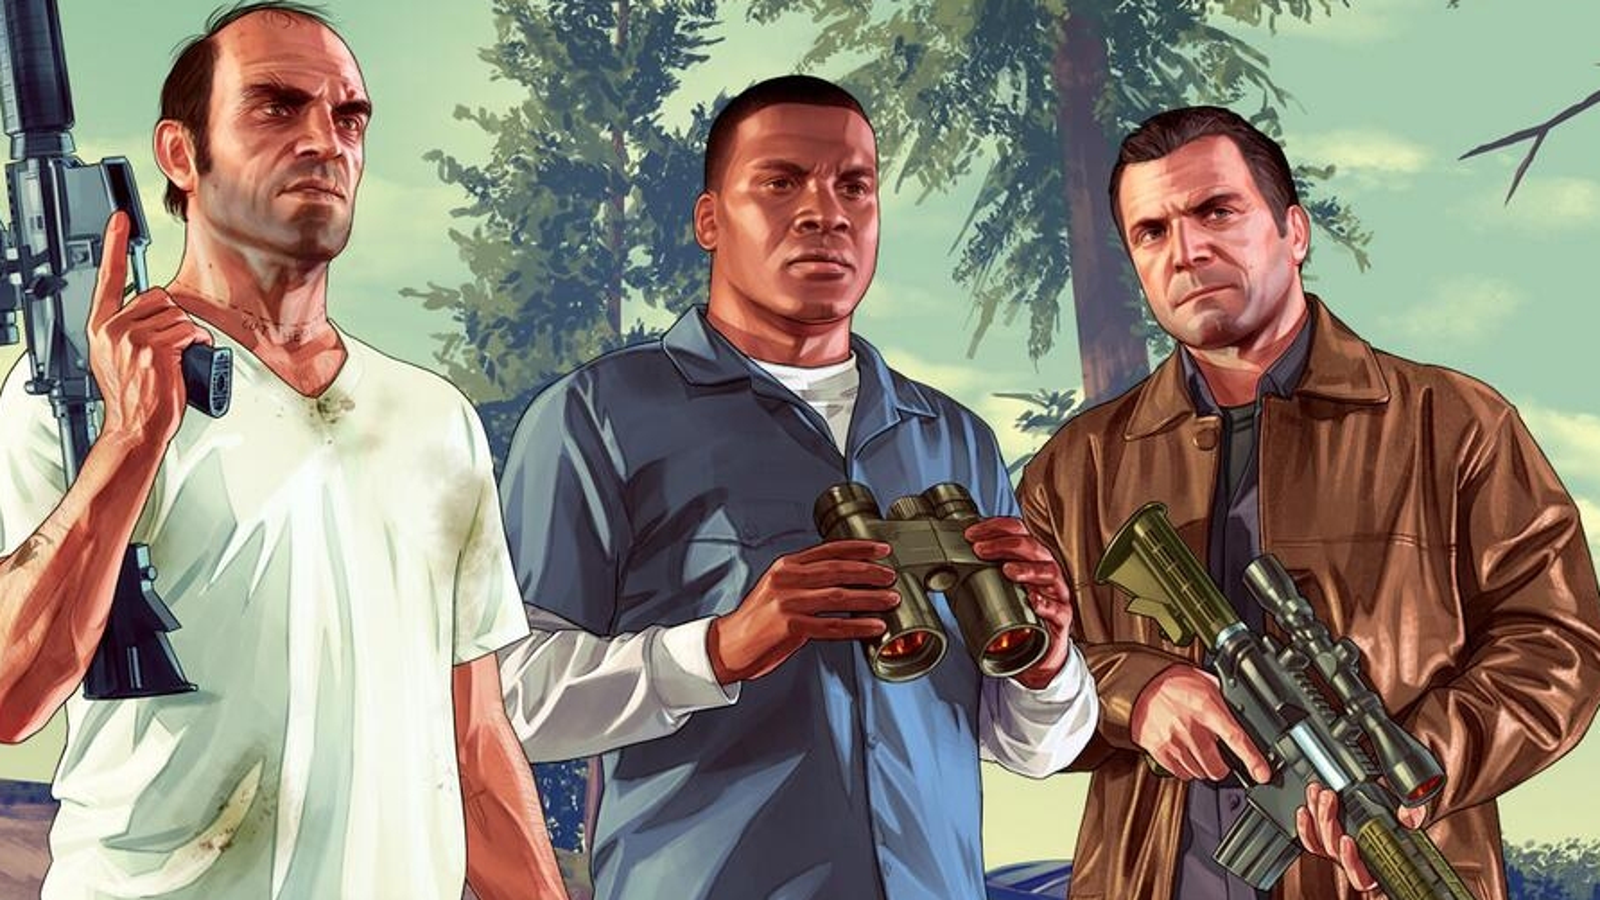 GTAV and GTA Online coming to PS5 on March 15 – PlayStation.Blog